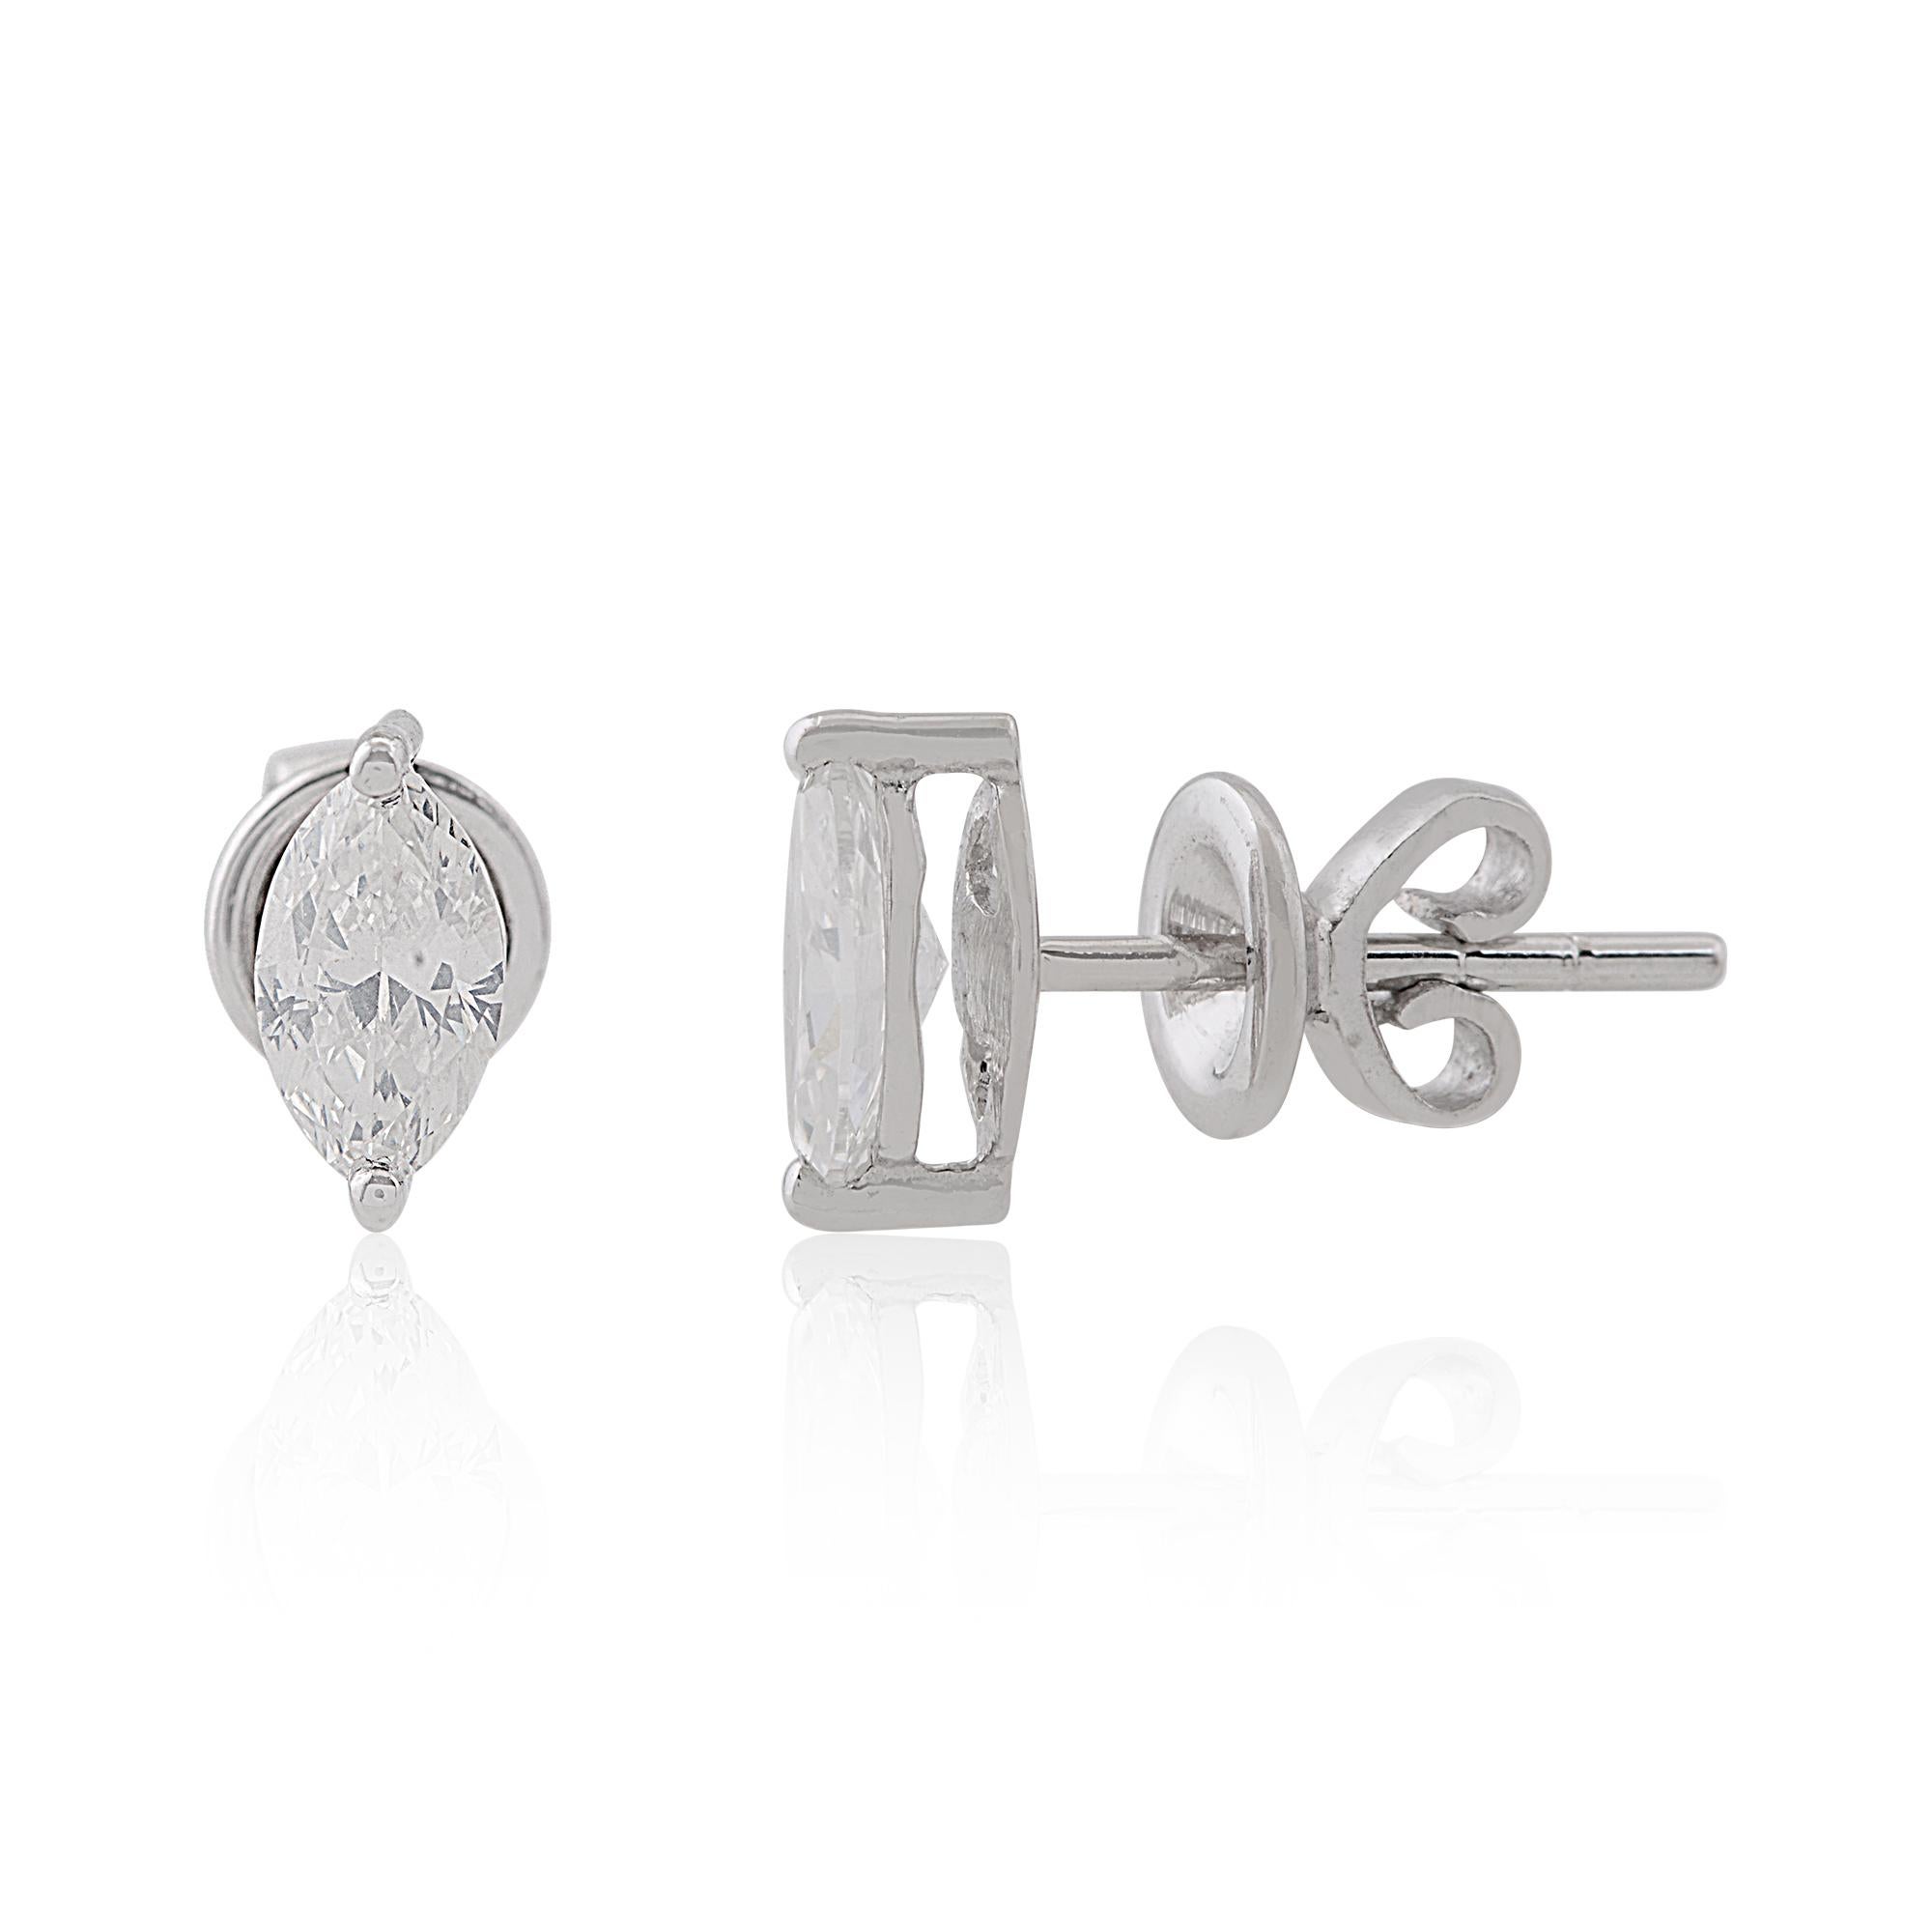 Each earring features a stunning marquise-cut diamond, meticulously selected for its exceptional clarity and brilliance. The marquise cut, with its elongated shape and gracefully tapered points, exudes a sense of grace and sophistication, while the